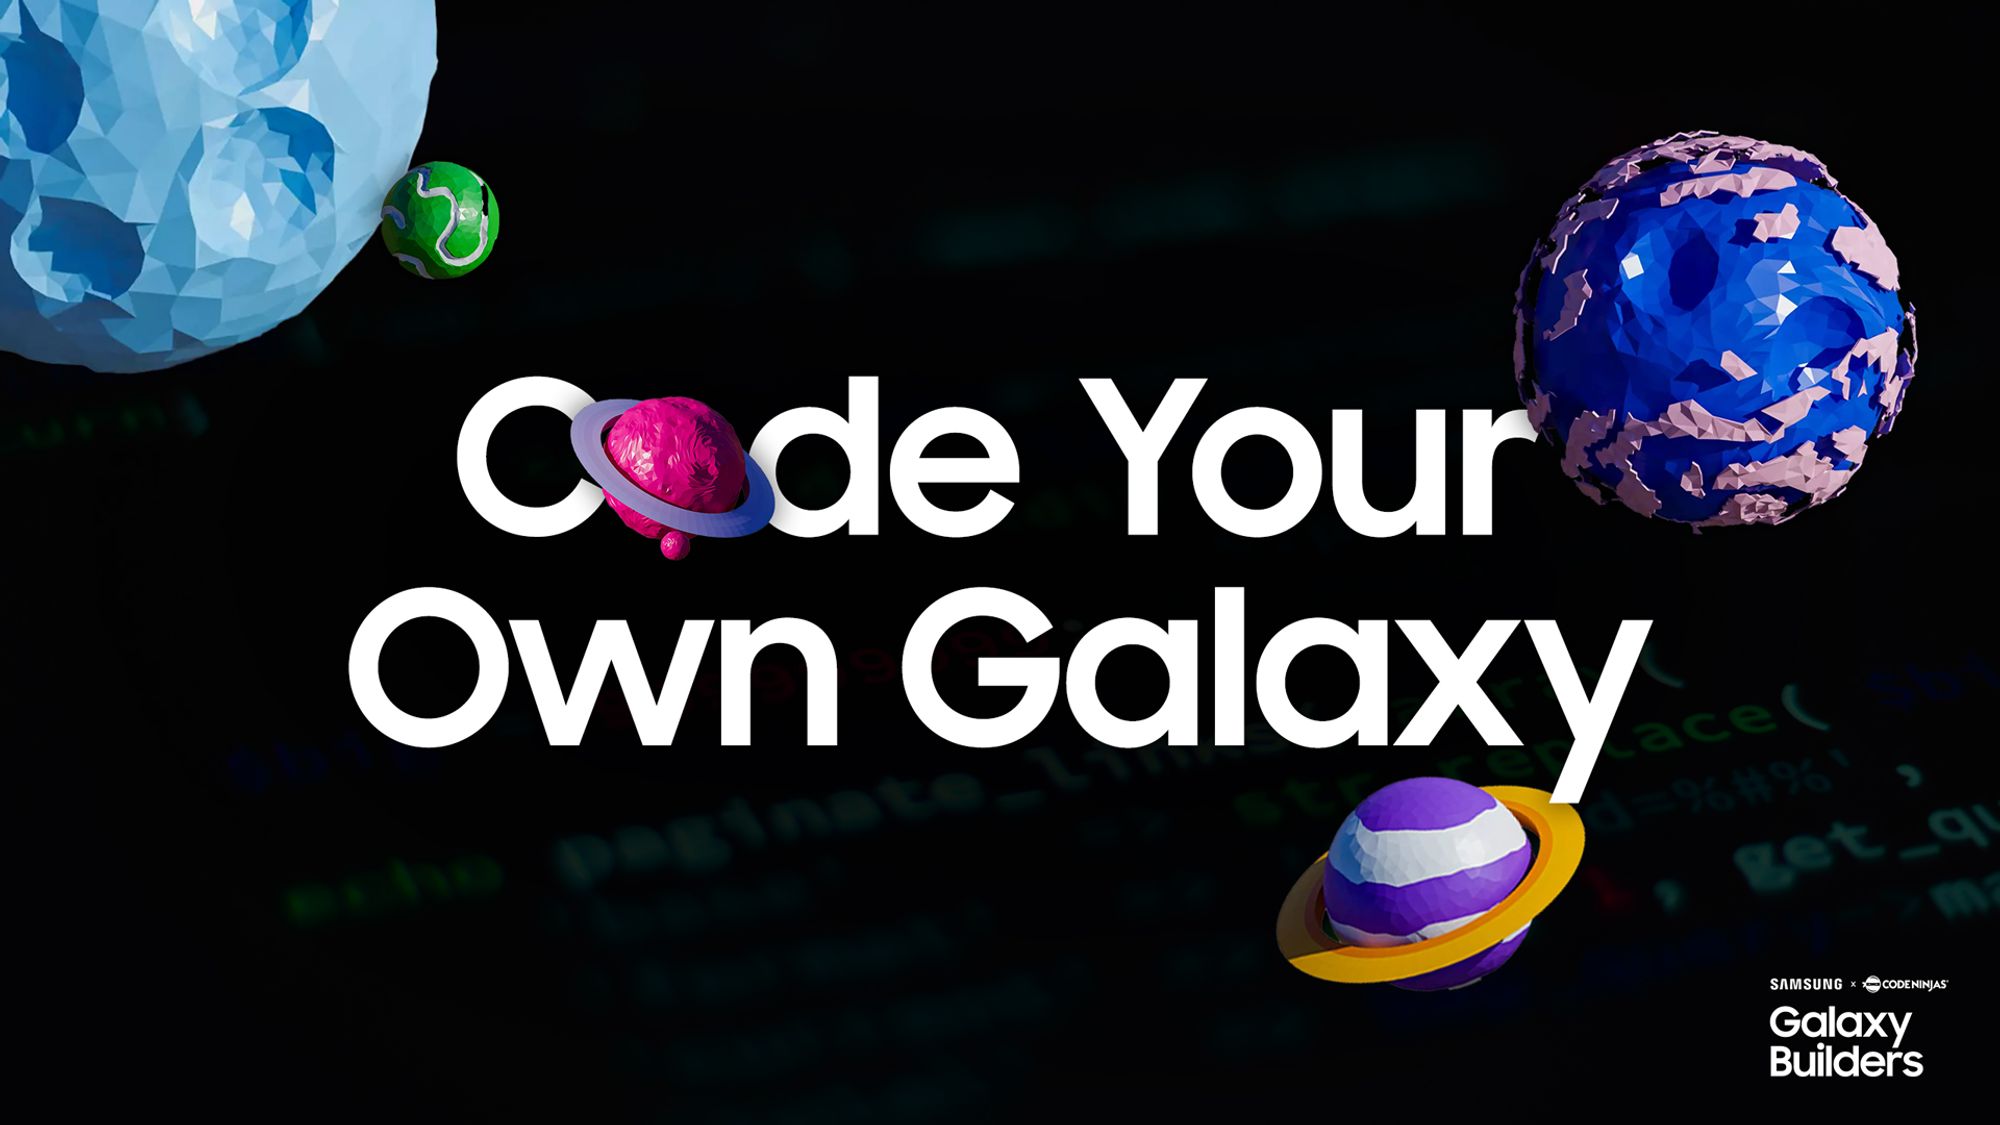 Samsung Code Your Own Galaxy Digital Campaign Image